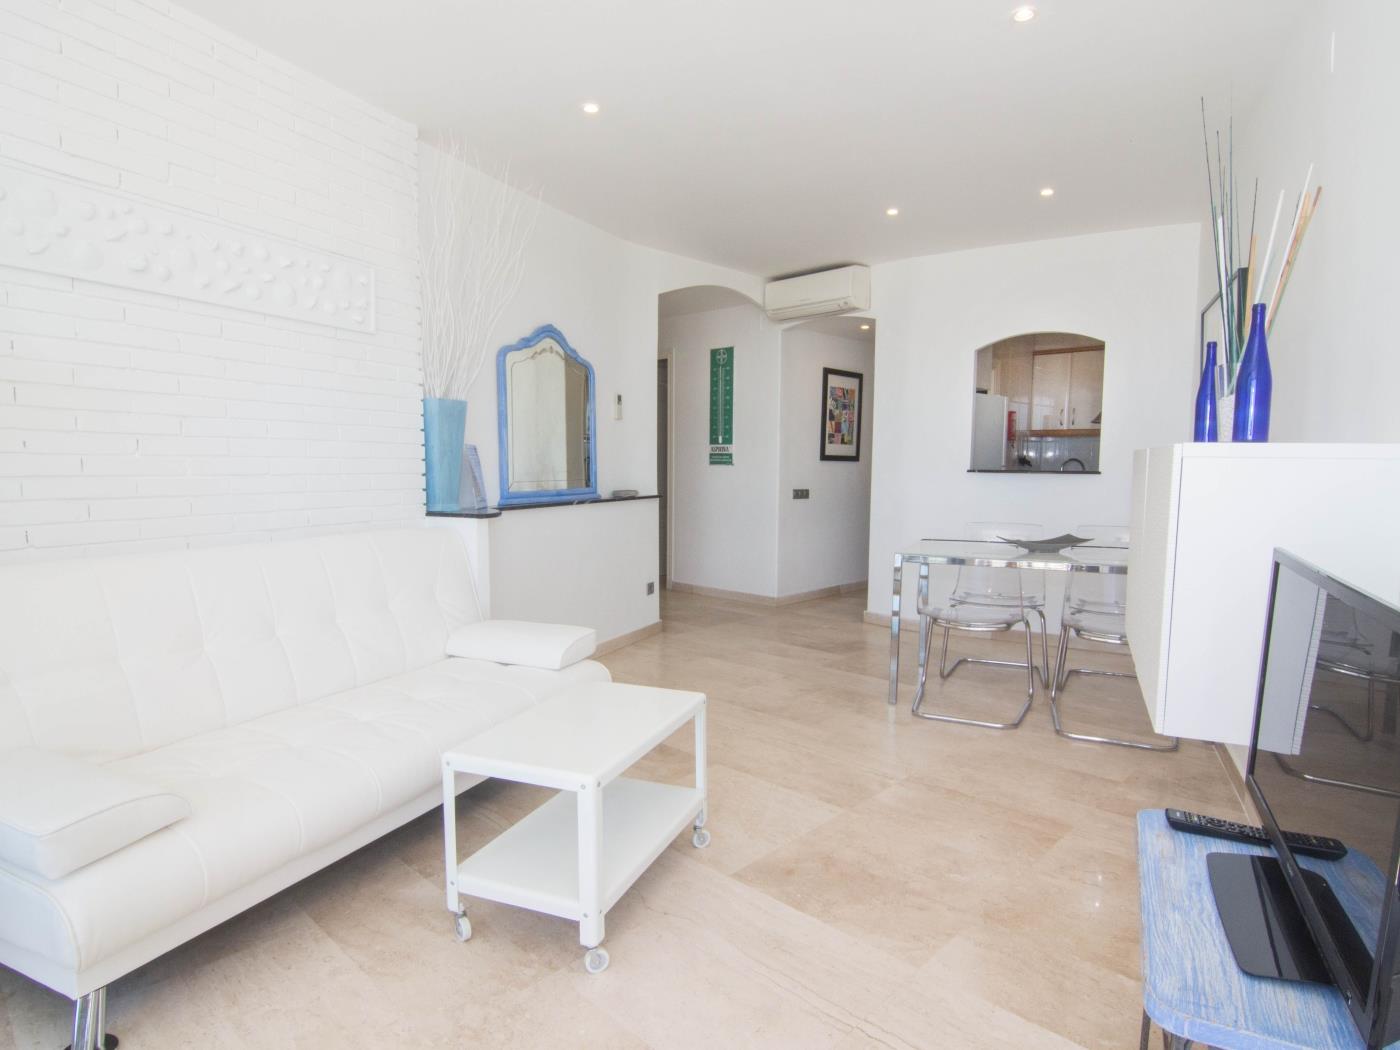 RIBERA SOL BY BLAUSITGES Beach front property with stunning sea views in Sitges. in SITGES